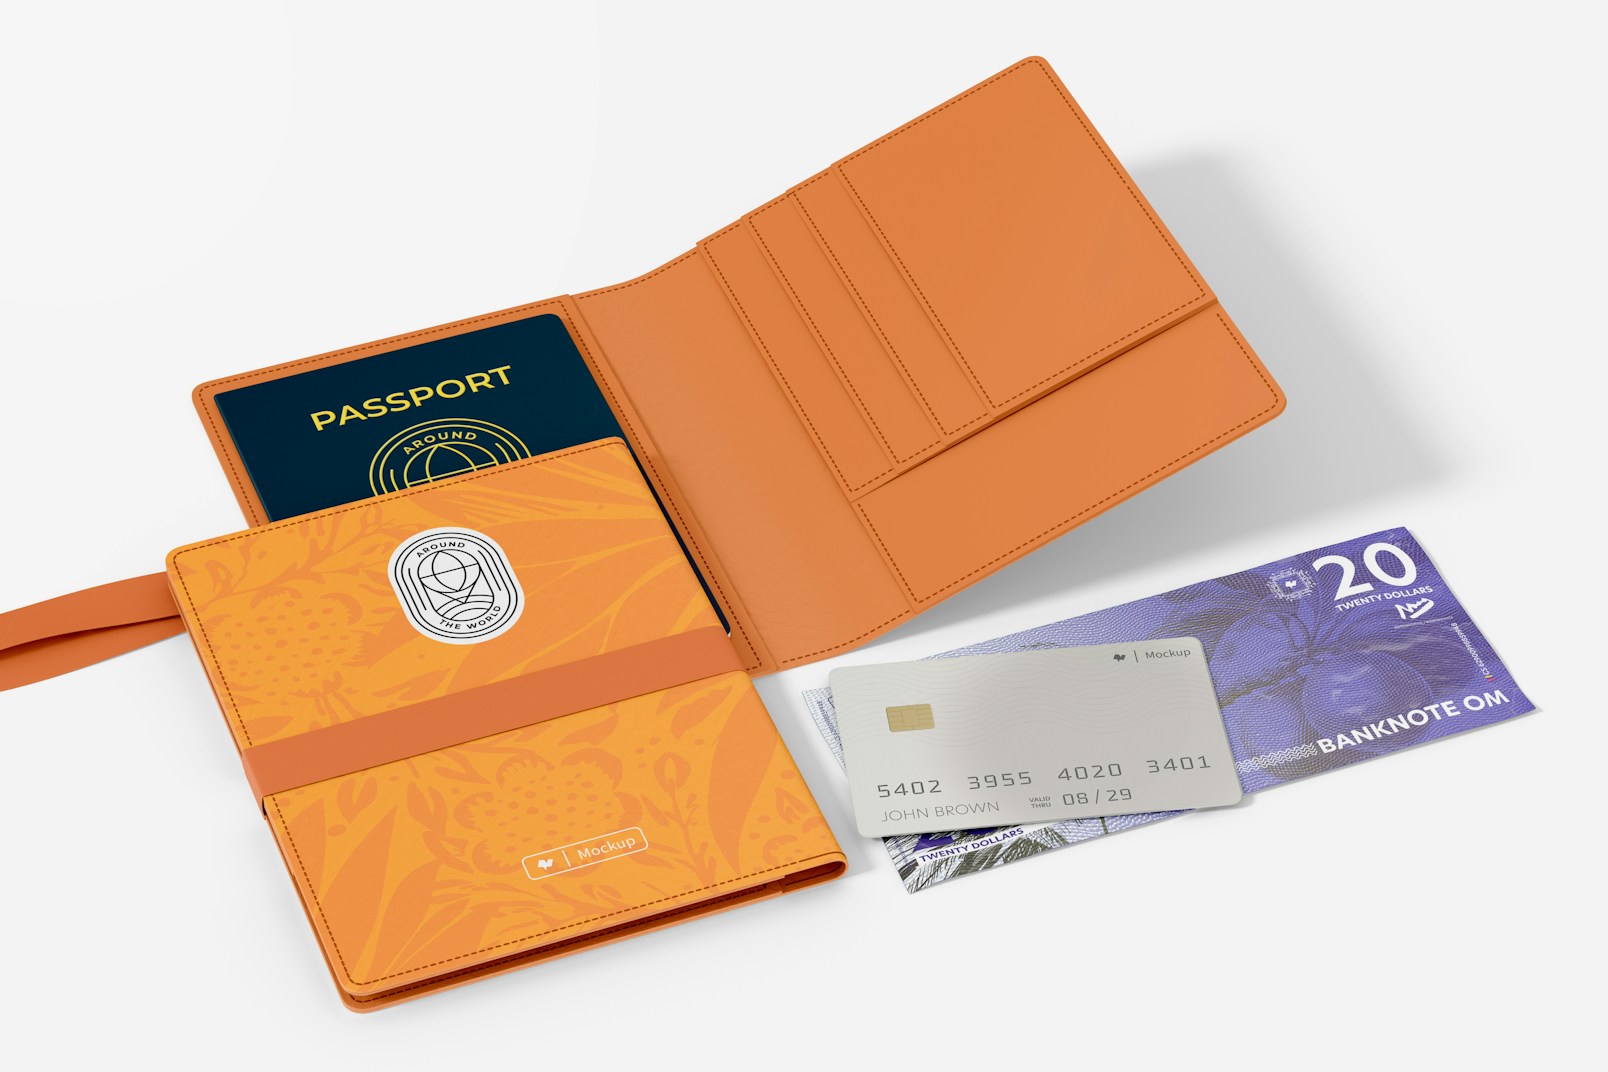 Passport Holders with Band Mockup, Opened and Closed